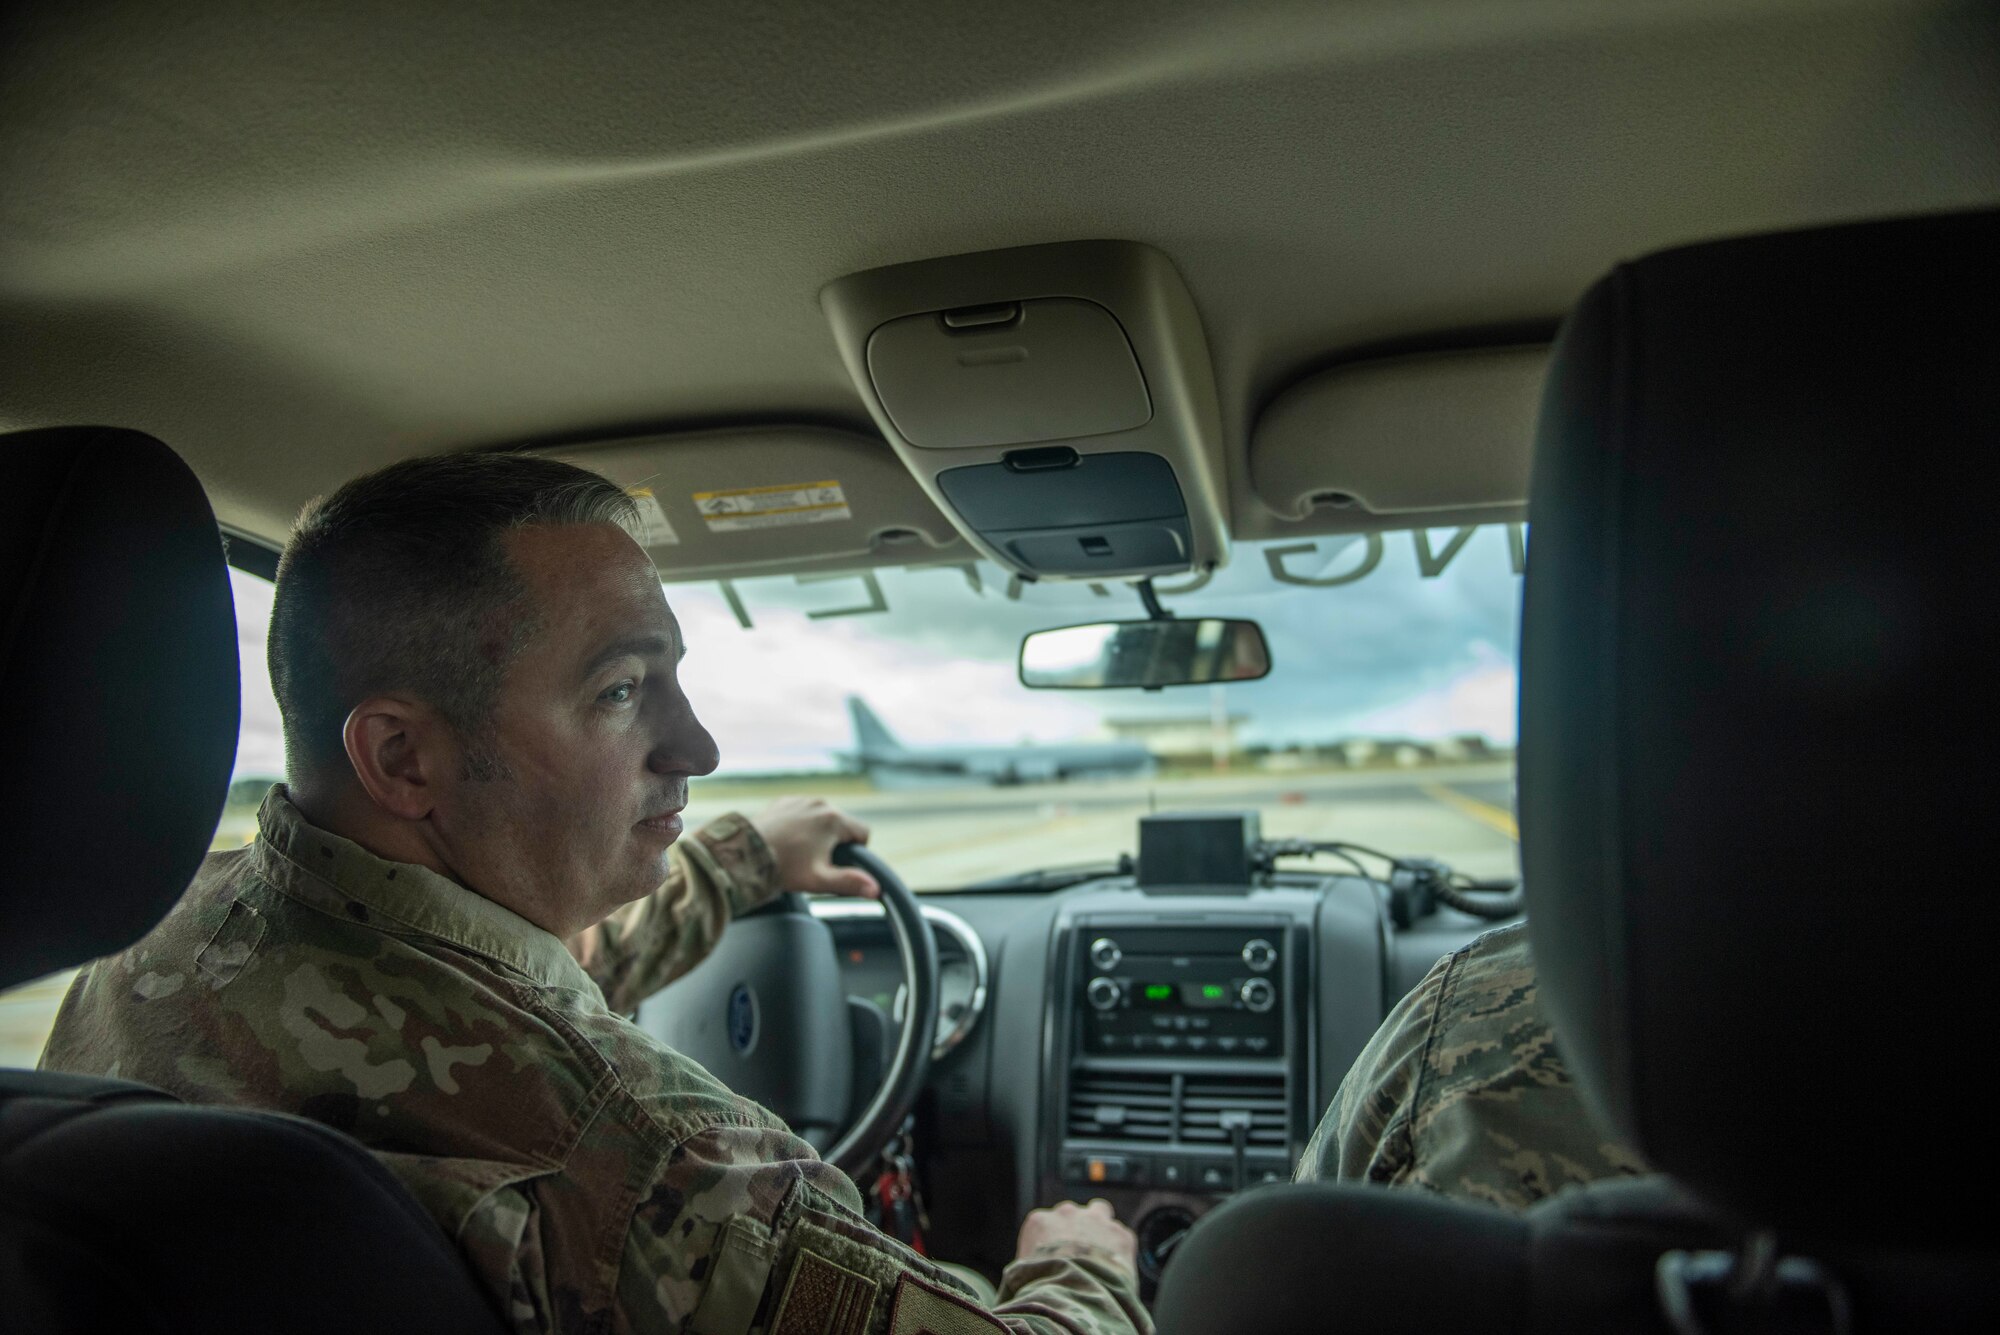 Master Sgt. Scott West, 100th Air Refueling Wing flight safety superintendent drives on the flightline to observe safety regulations are being followed at RAF Mildenhall, England, Sept. 26, 2019. The nine-person safety office is organized into three different departments: occupational safety, flight safety and weapons safety. (U.S. Air Force photo by Senior Airman Luke Milano)